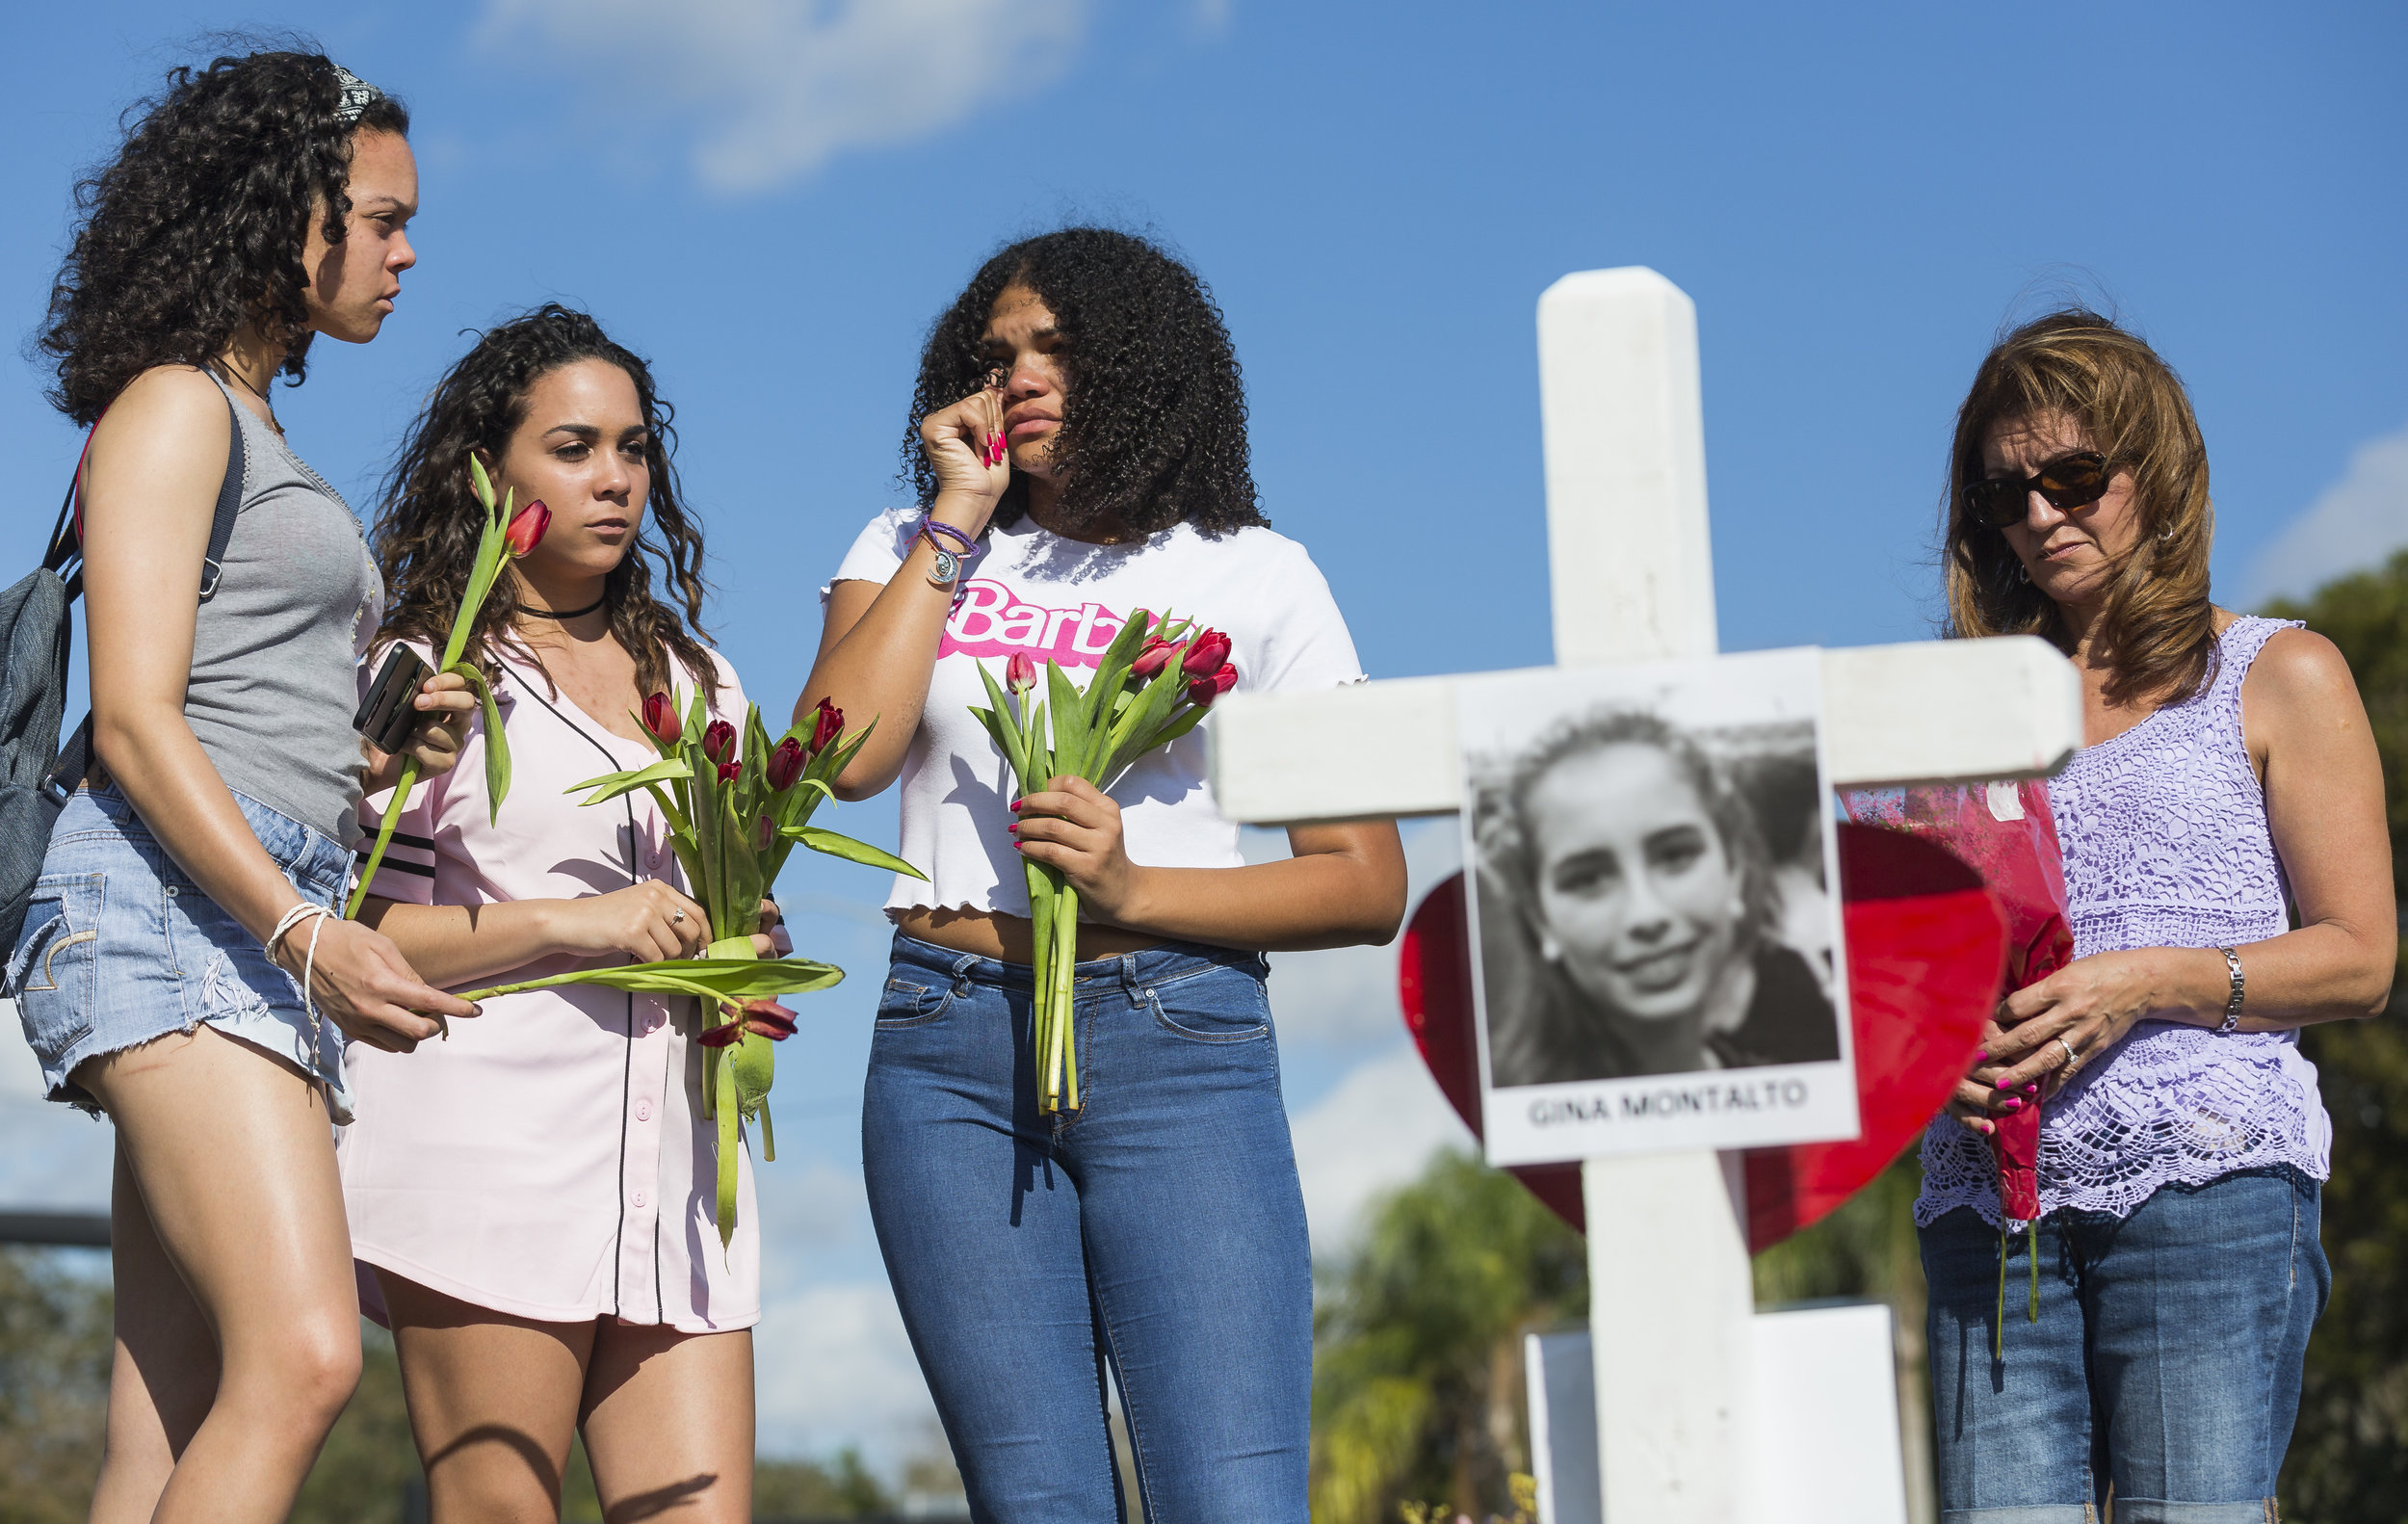  From left to right: Tatana Hobson 14, Annia Hobson 13, and Leilany Canate, 16, mourn in front of Marjory Stoneman Douglas High School in Parkland, Florida on Sunday, February 18, 2018. A gunman entered the school and killed 14 students and 3 teacher